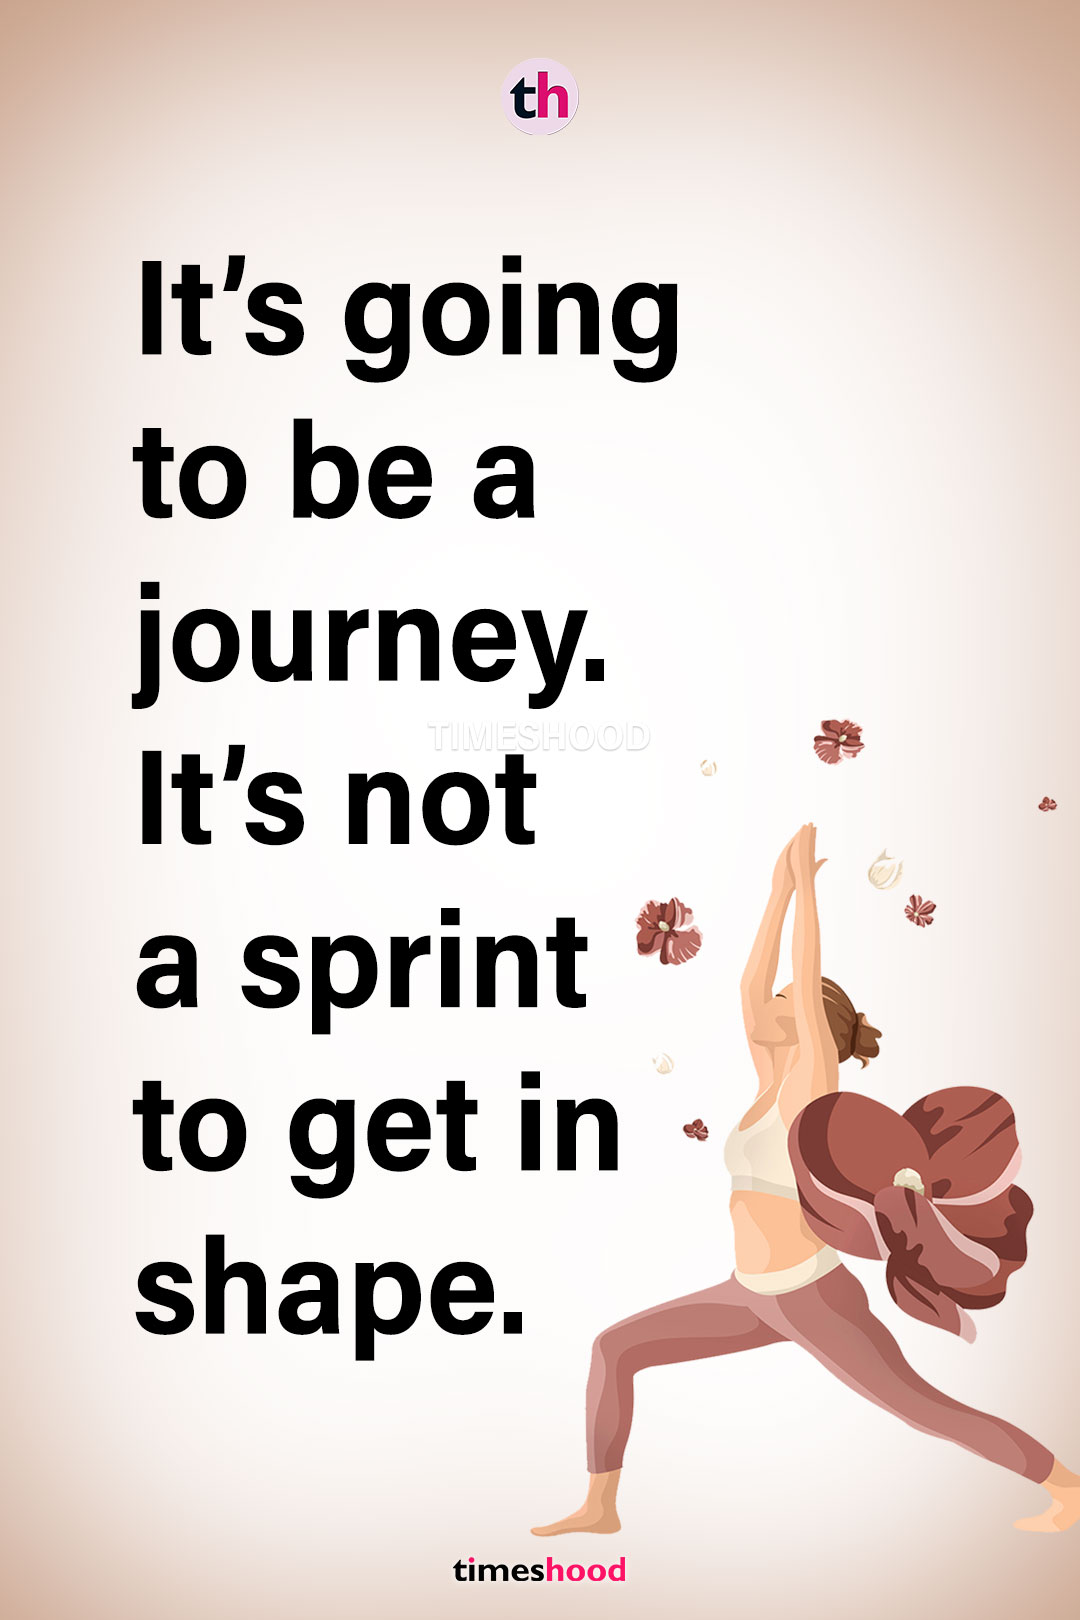 It’s going to be a journey. It’s not a sprint to get in shape. - Best Workout routine quotes.